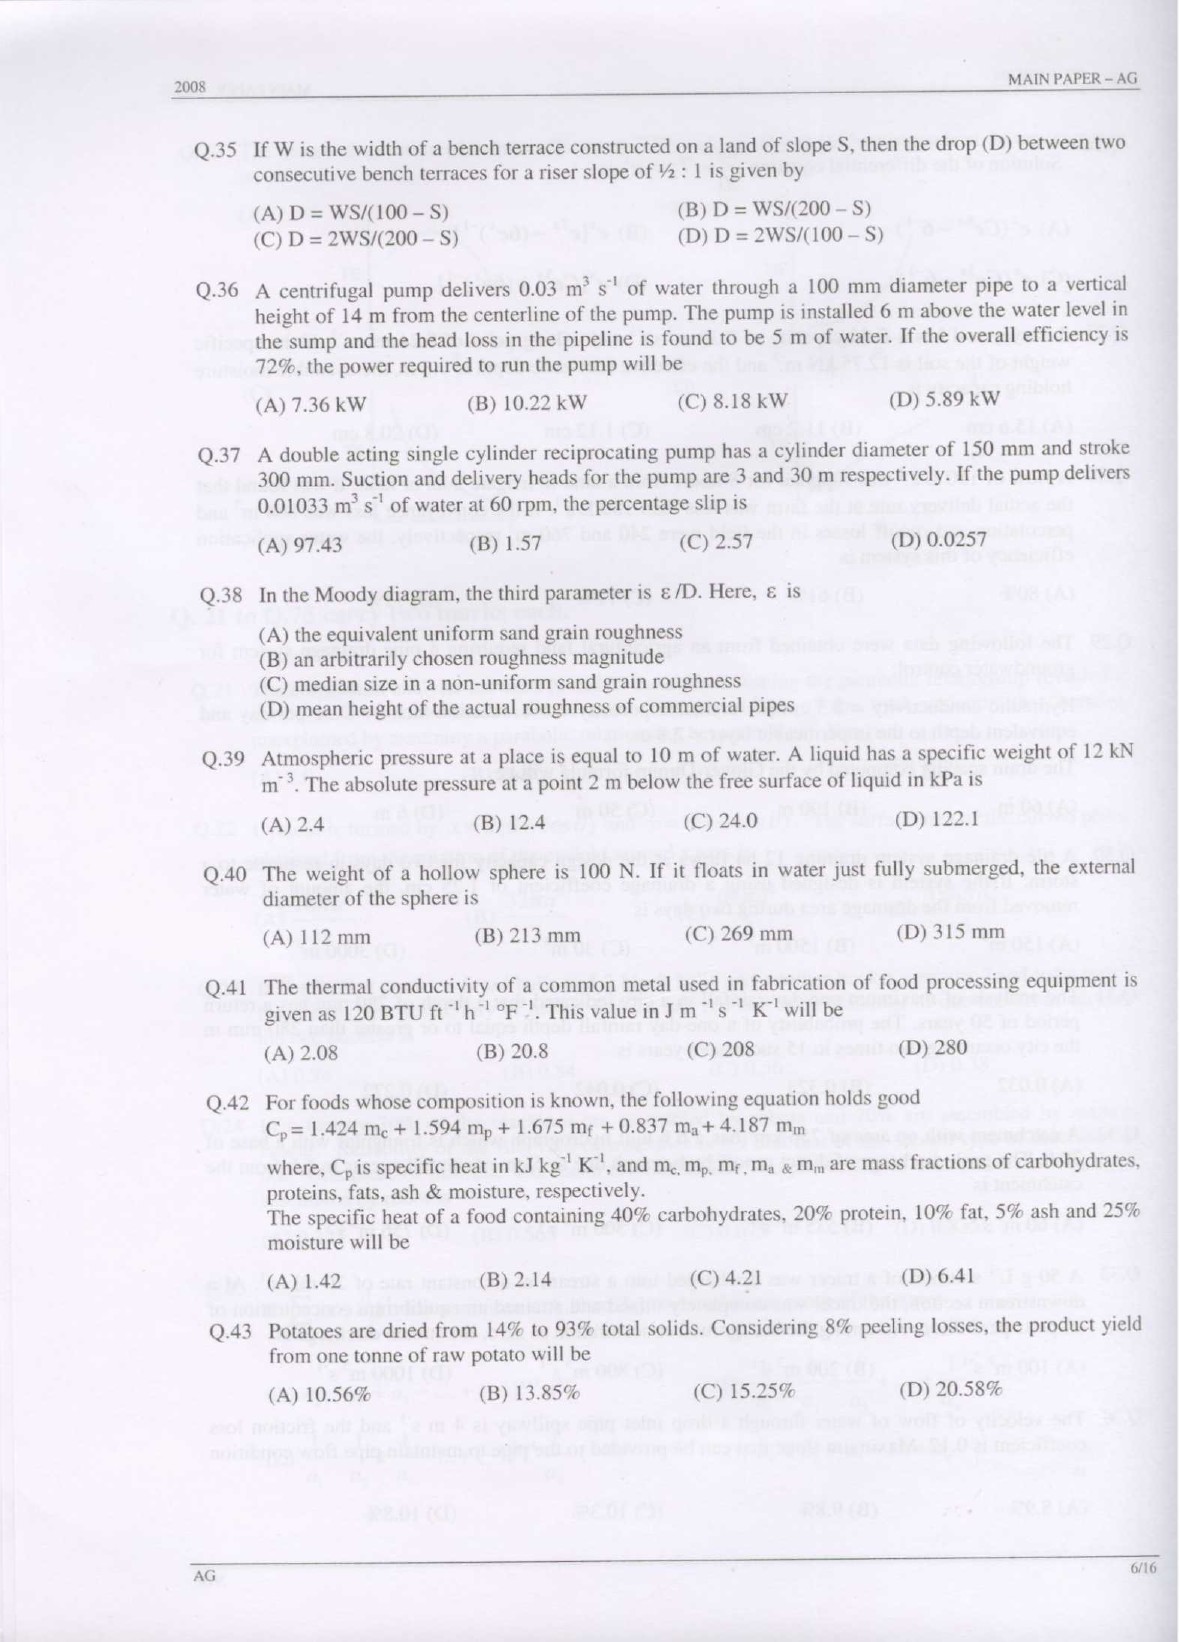 GATE Exam Question Paper 2008 Agricultural Engineering 6